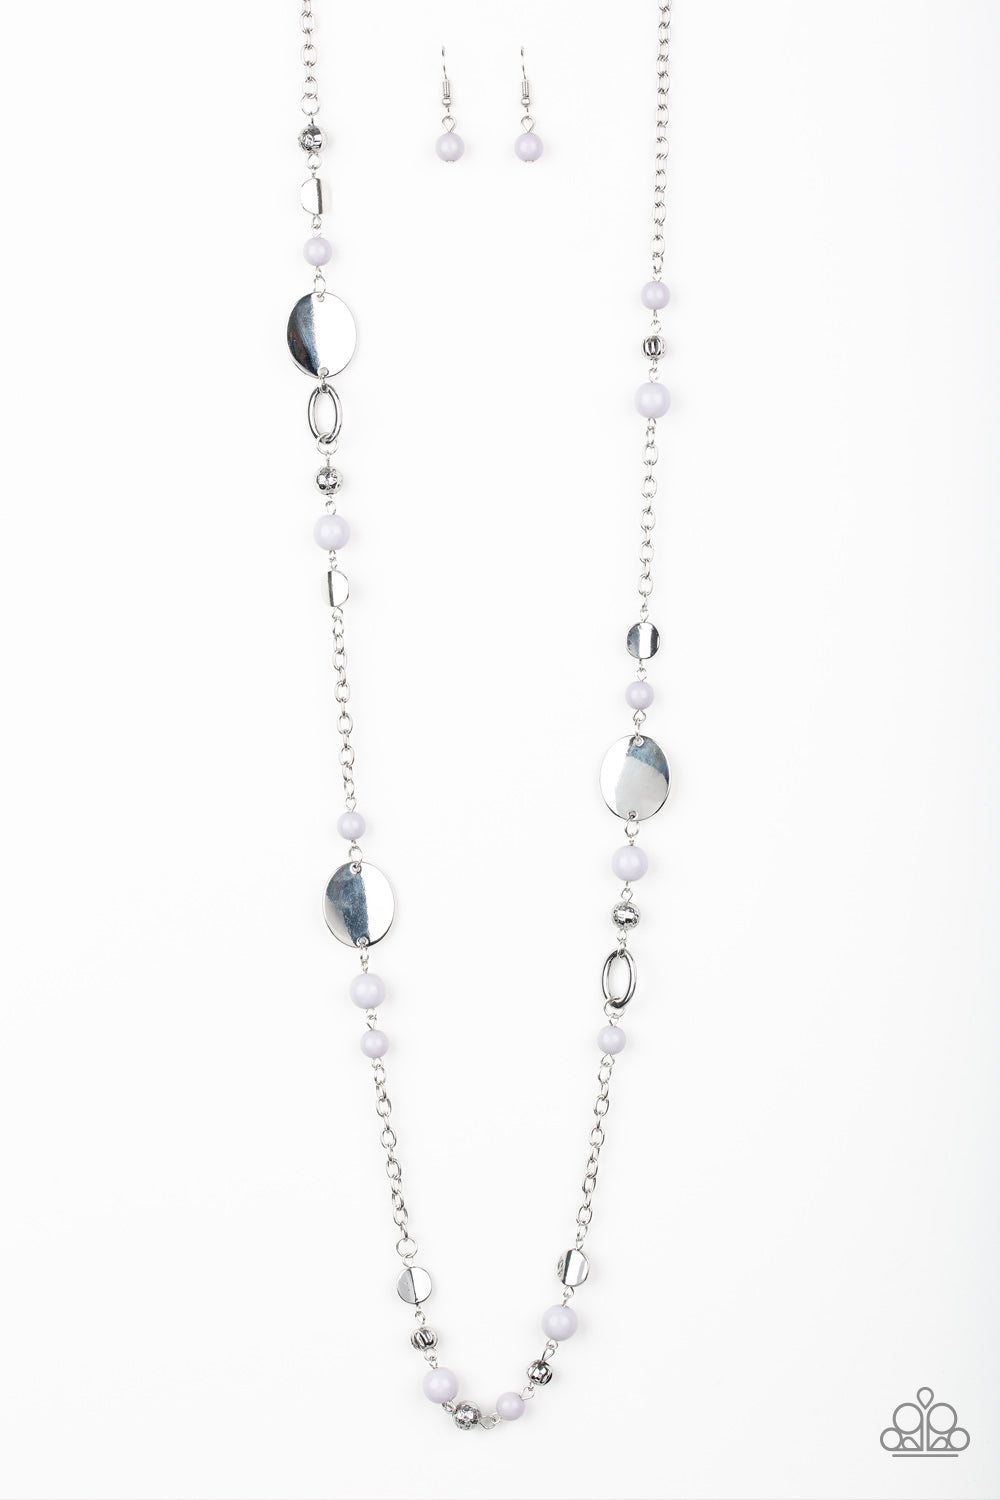 Serenely Springtime None-Silver Necklace